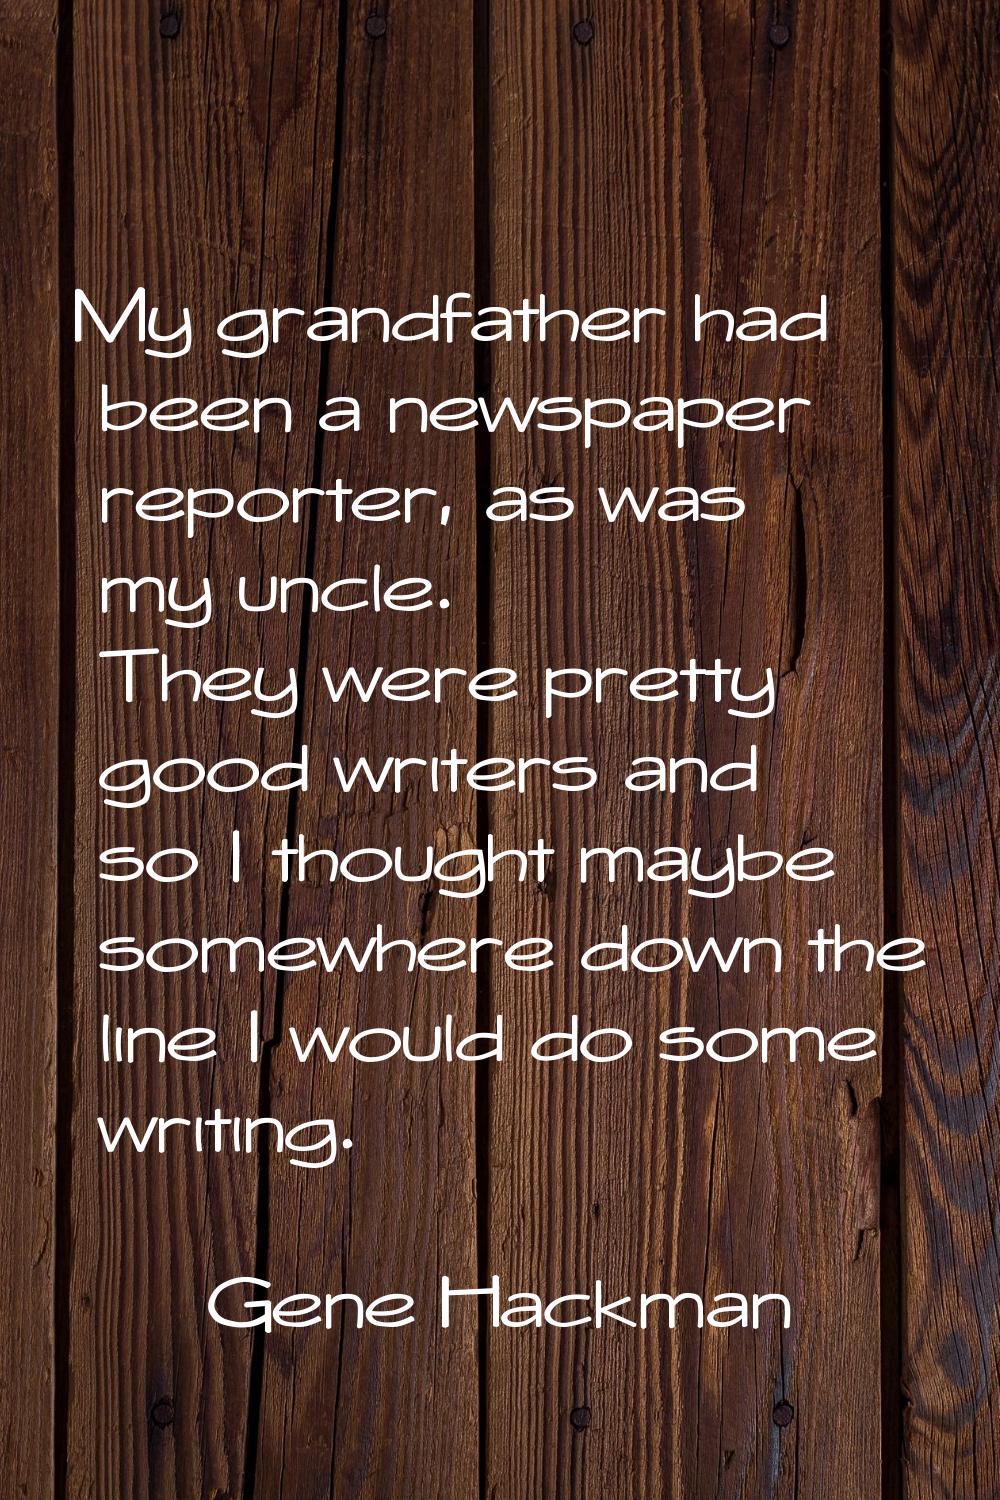 My grandfather had been a newspaper reporter, as was my uncle. They were pretty good writers and so